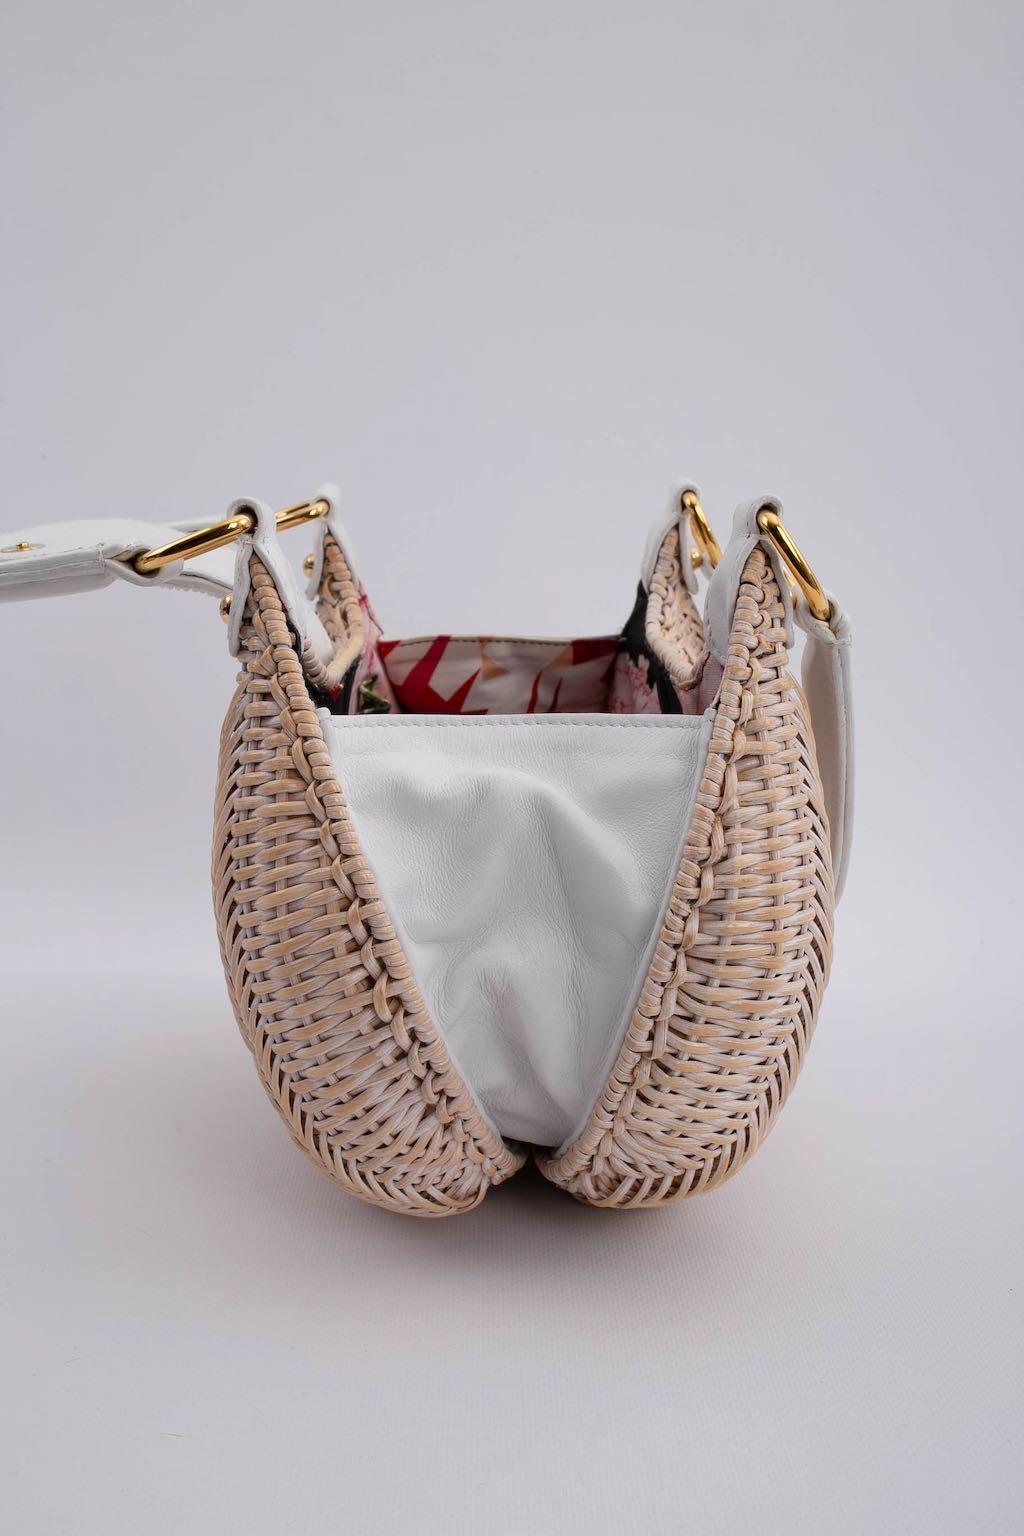 Christian Lacroix Wicker Bag For Sale 6